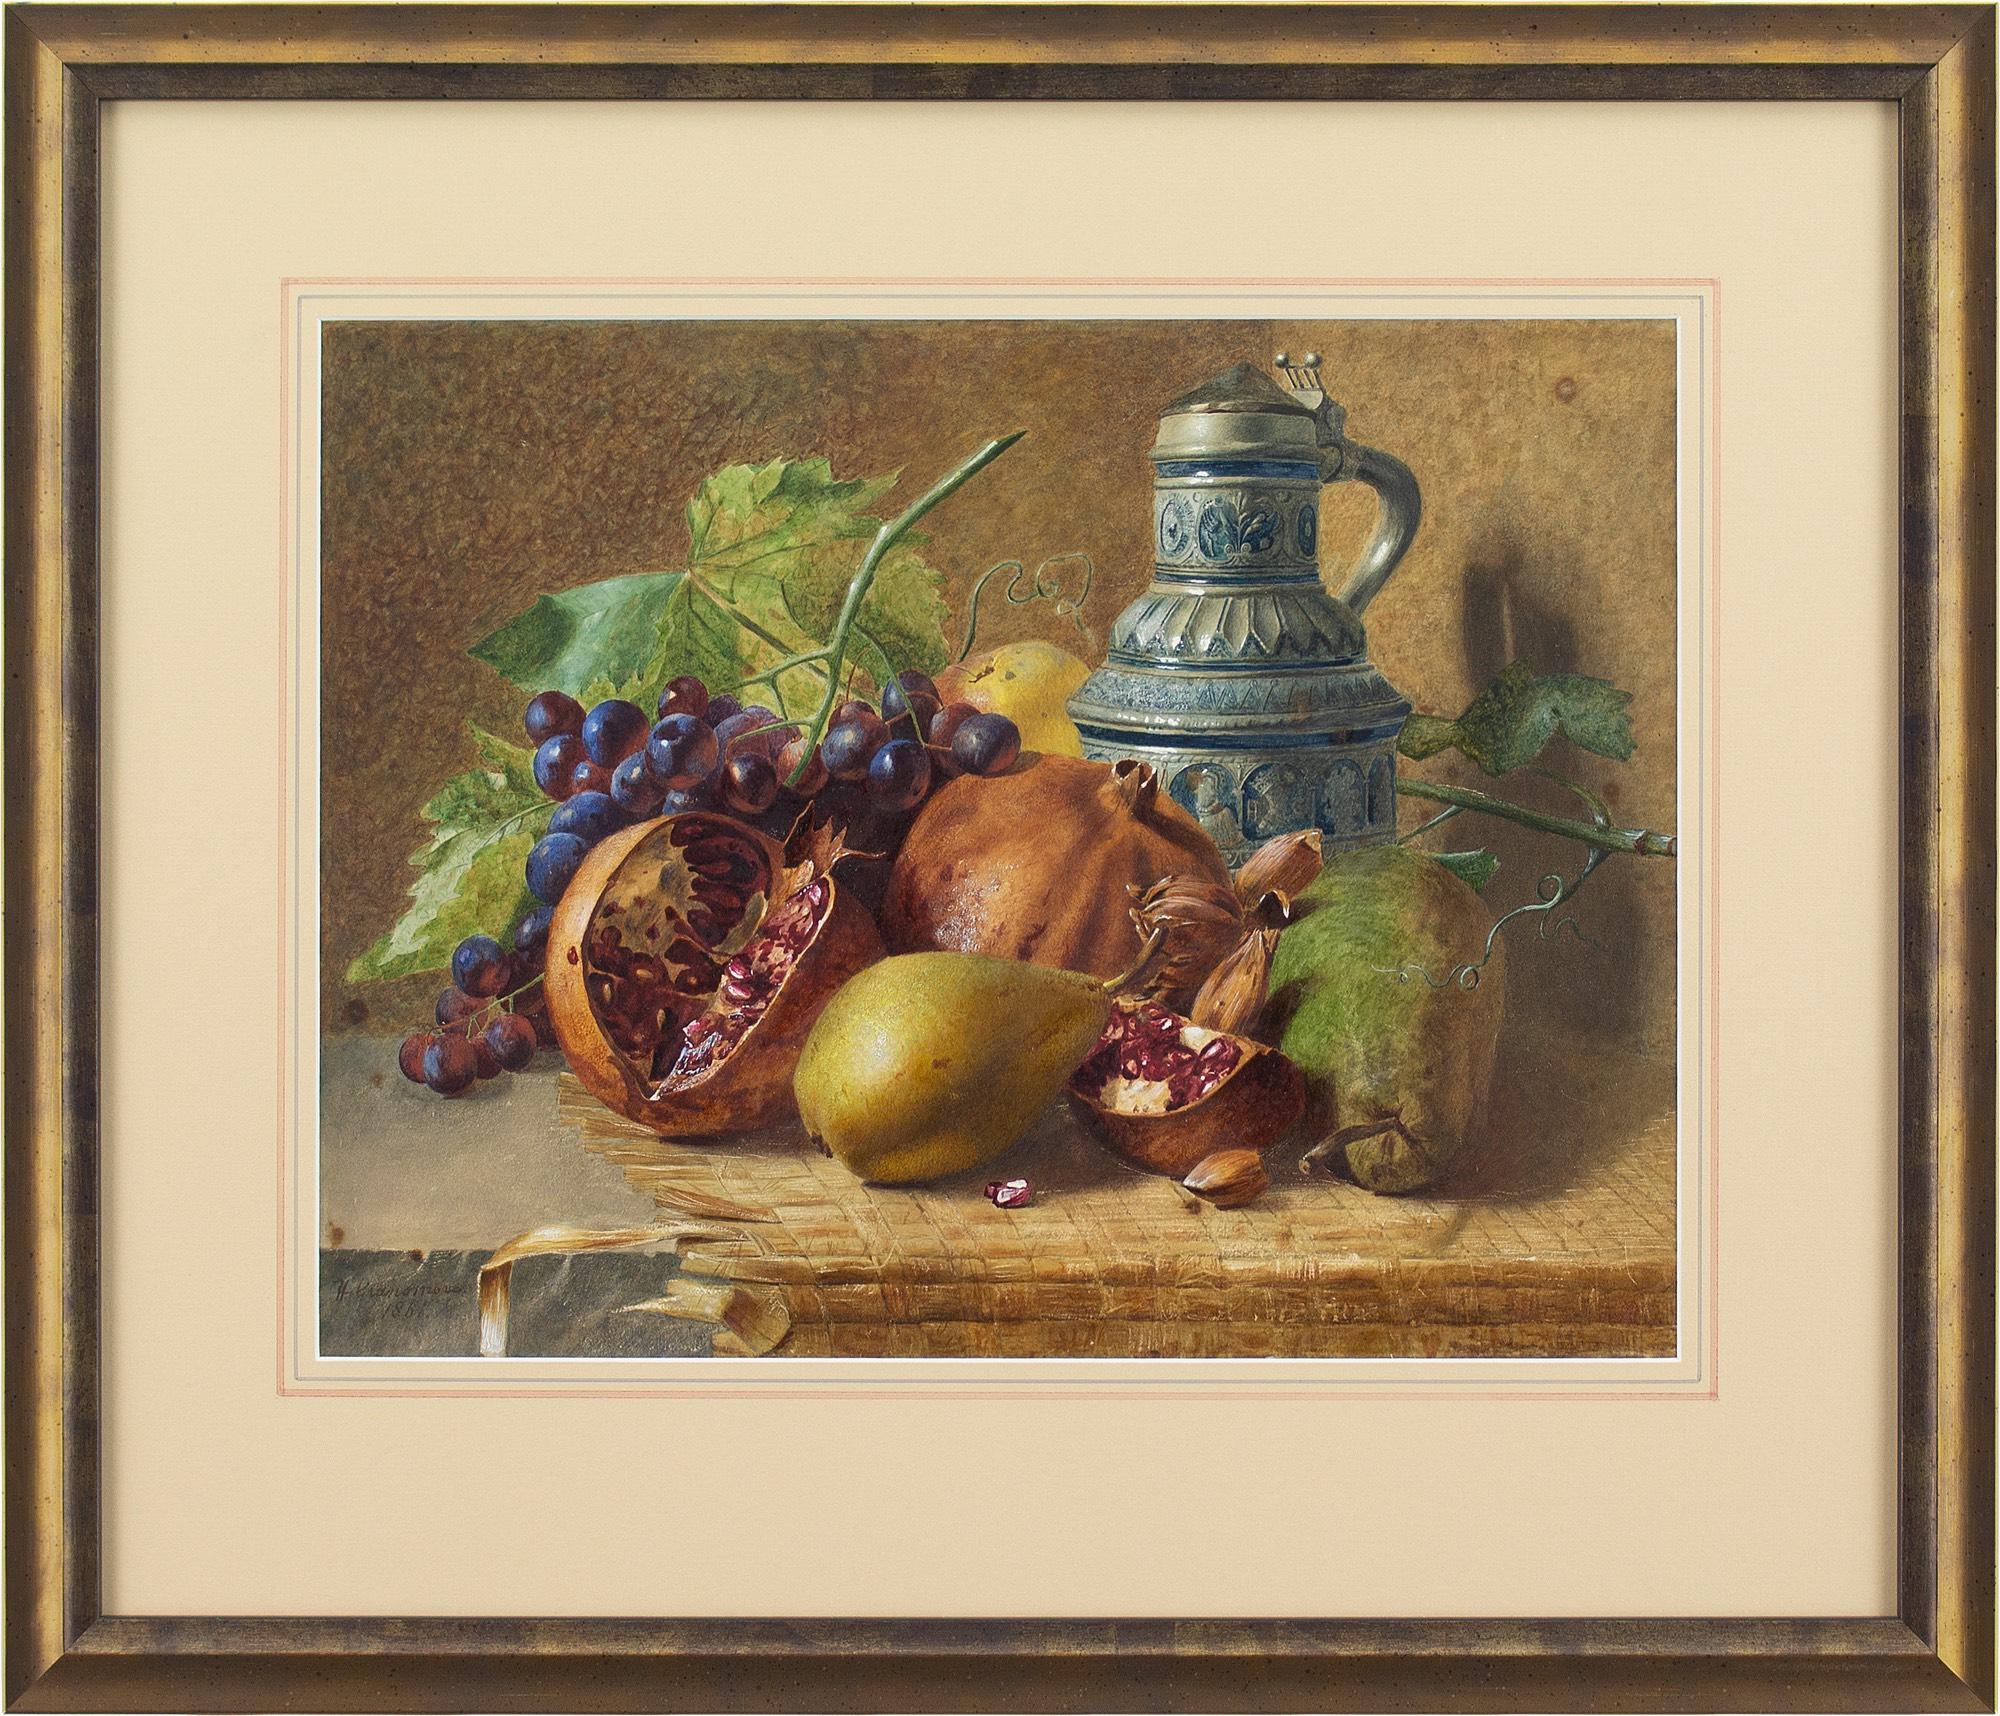 This vibrant 19th-century still life depicts an abundant array of fruit including pomegranates, pears, and grapes with a jug. There’s a fine quality to the brushwork with every element rendered with a skilful touch and careful observation.

It’s an